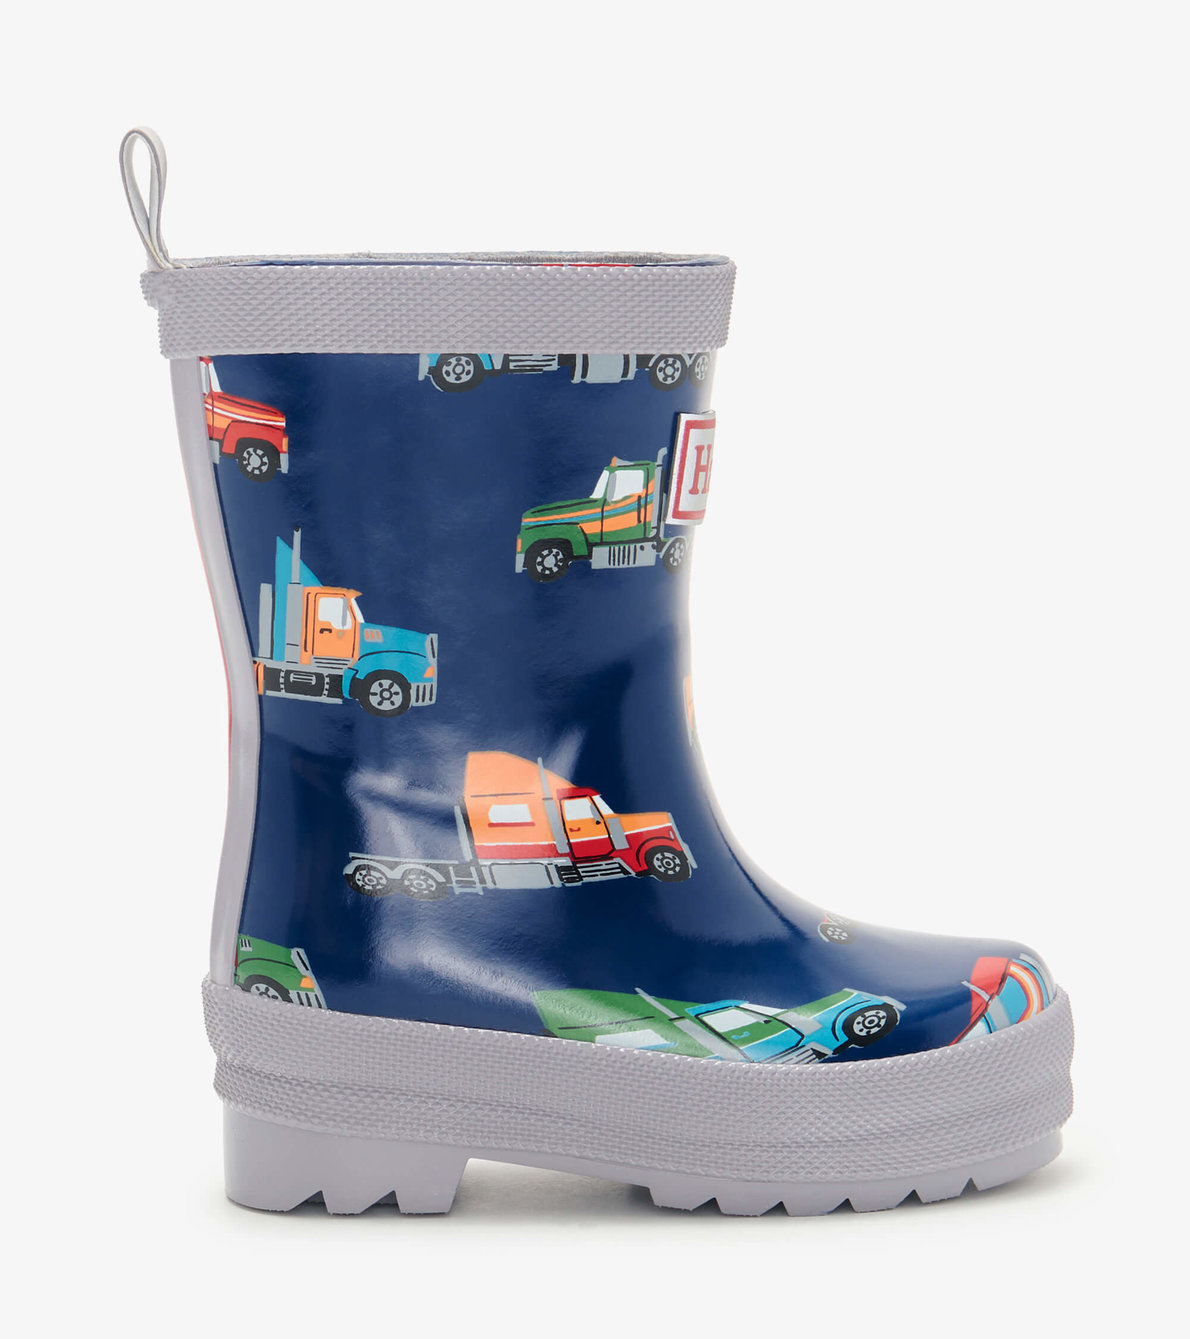 View larger image of My 1st Rain Boots - Big Rigs